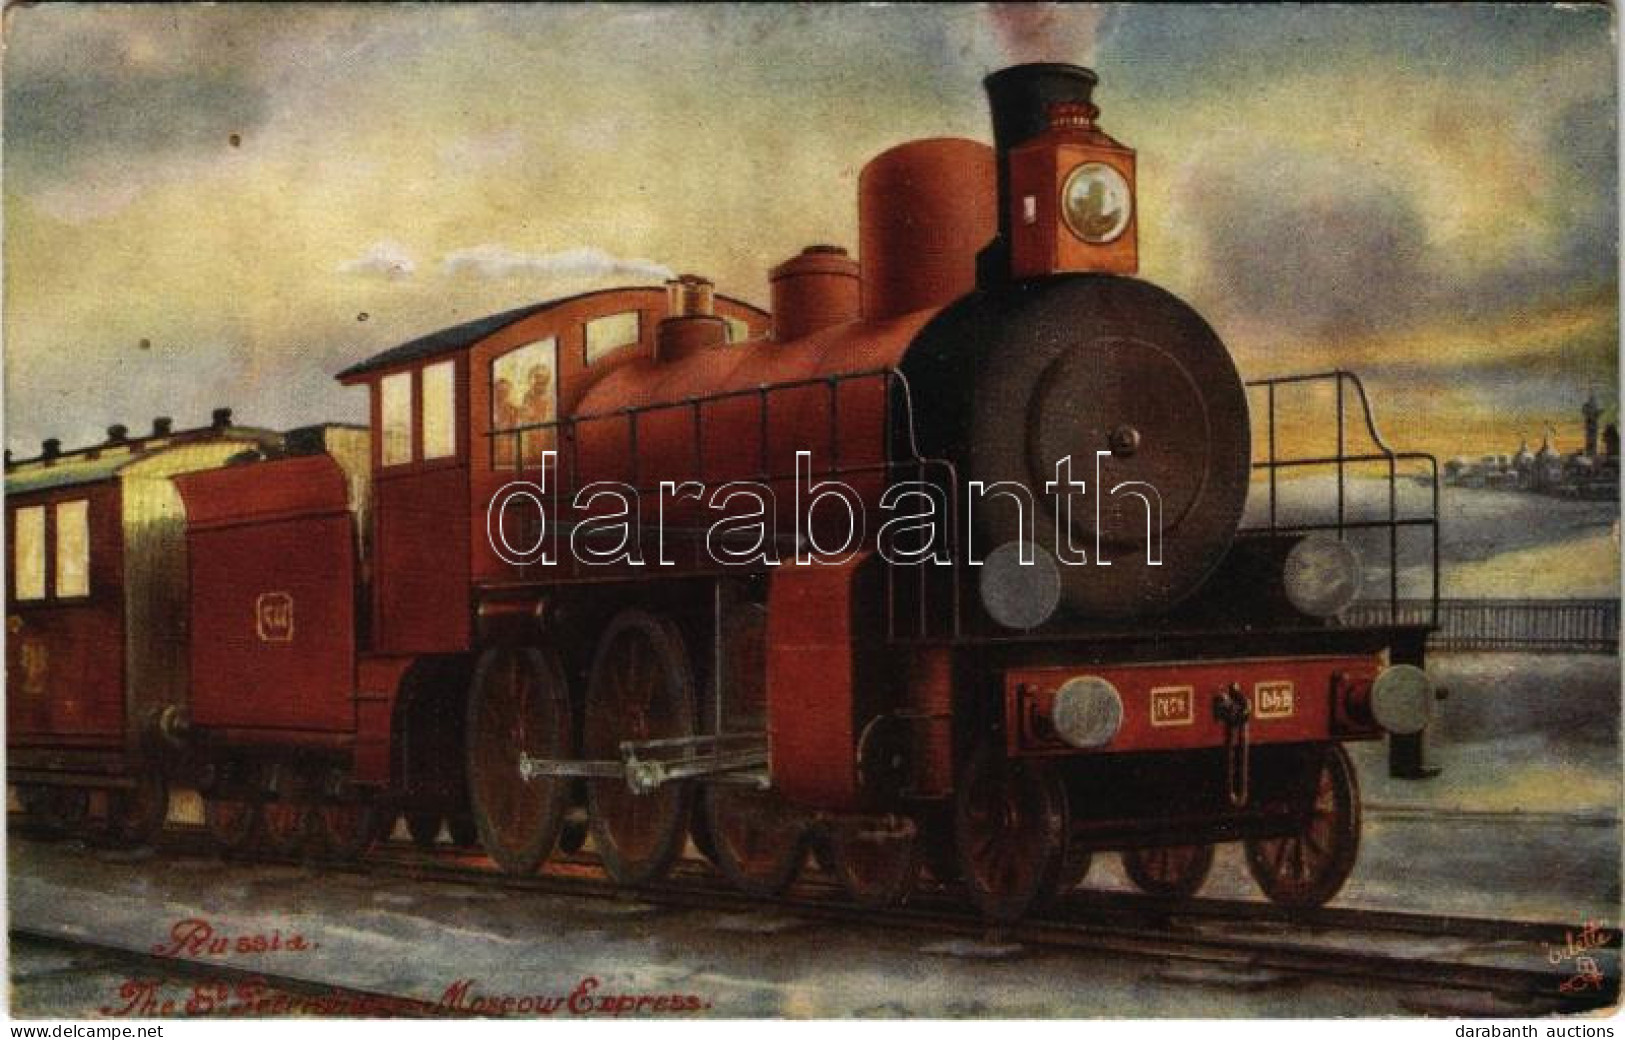 T2/T3 1908 Russia, The St. Petersburg-Moscow Express, Locomotive, Train. Raphael Tuck & Sons "Oilette" Postcard 9274. "R - Unclassified